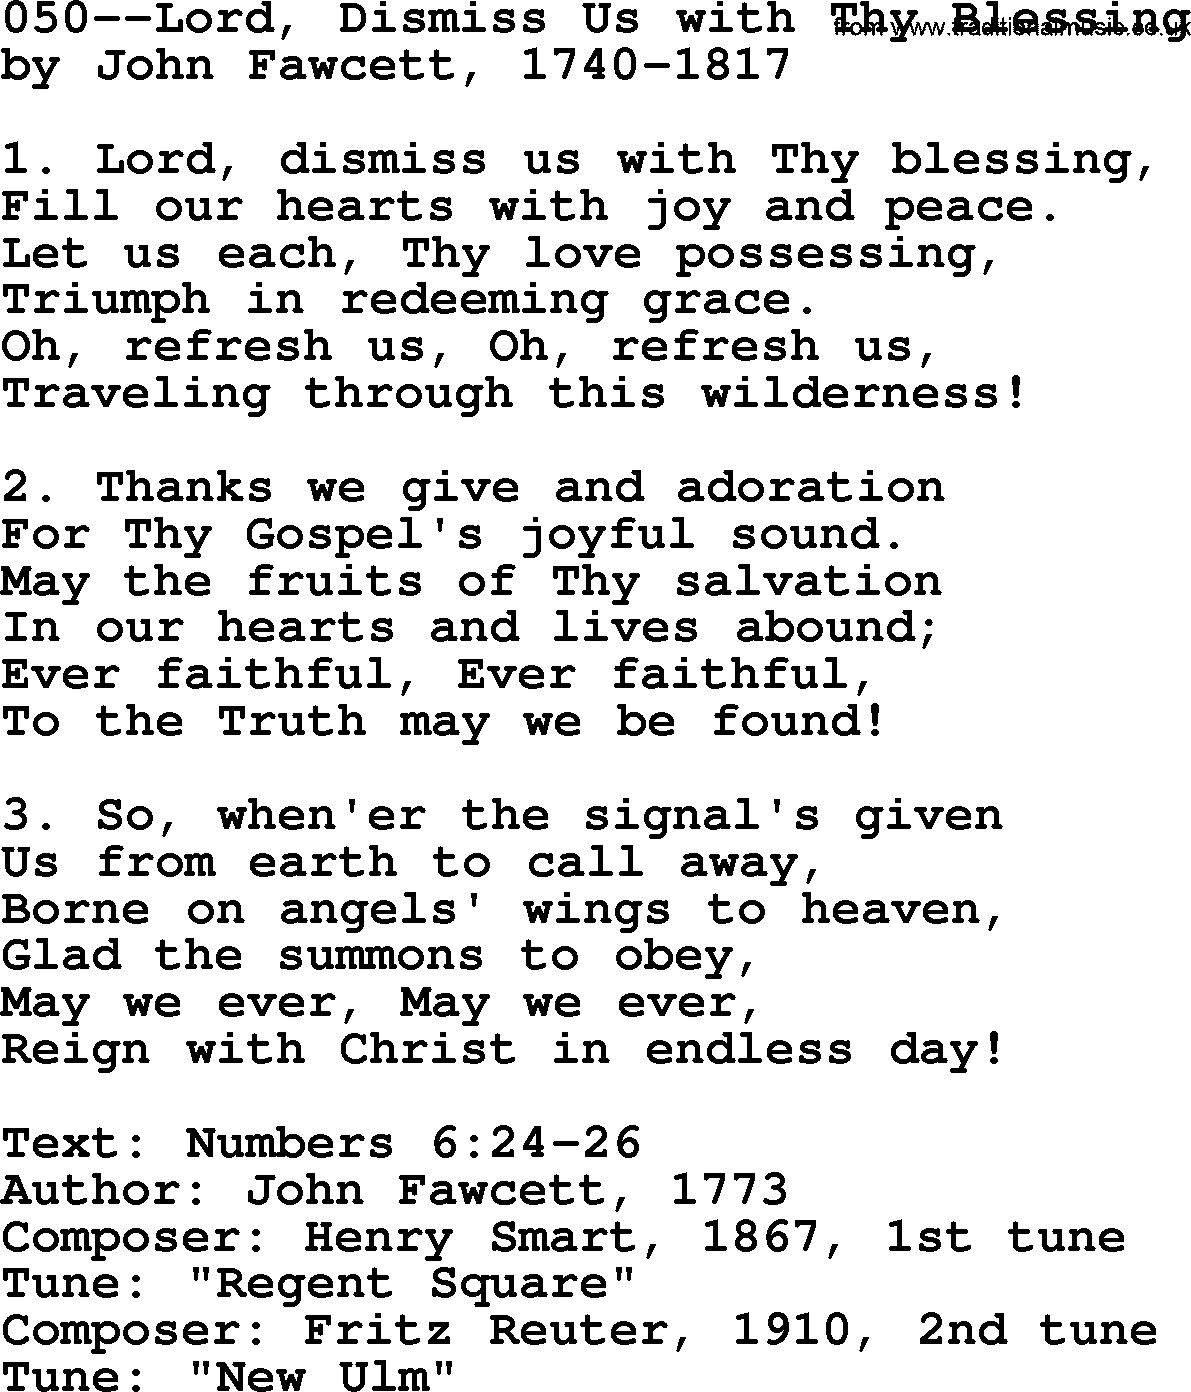 Lutheran Hymn: 050--Lord, Dismiss Us with Thy Blessing.txt lyrics with PDF